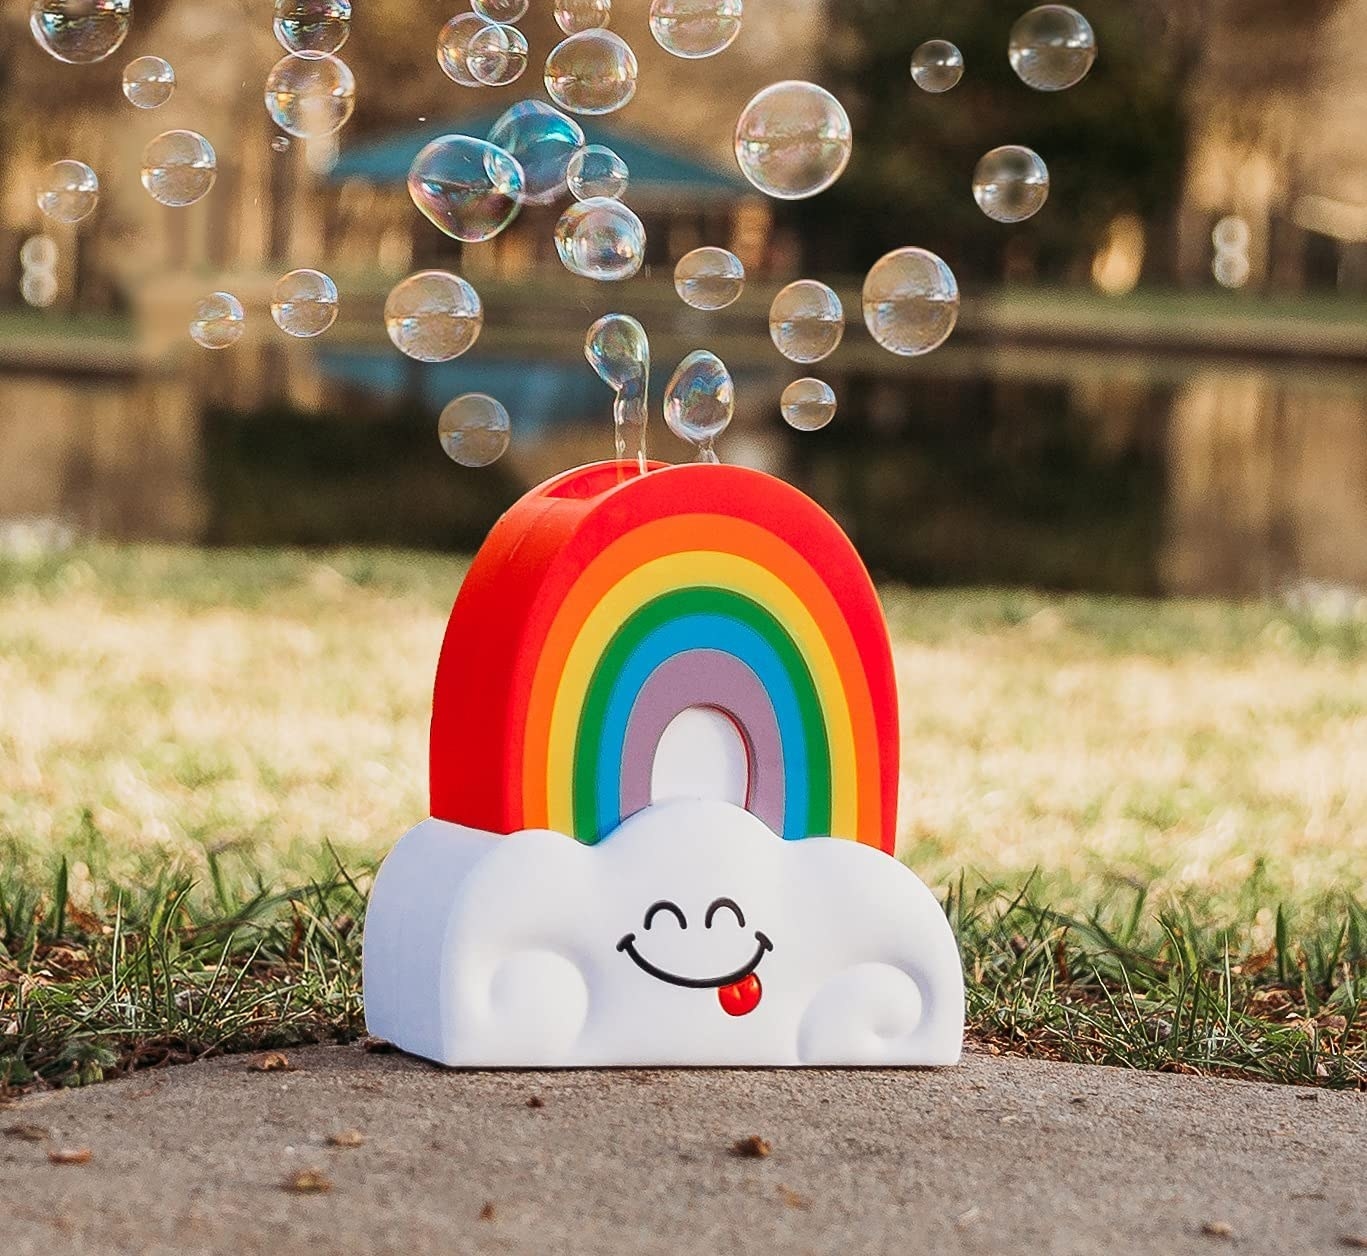 the bubble maker in the rainbow style